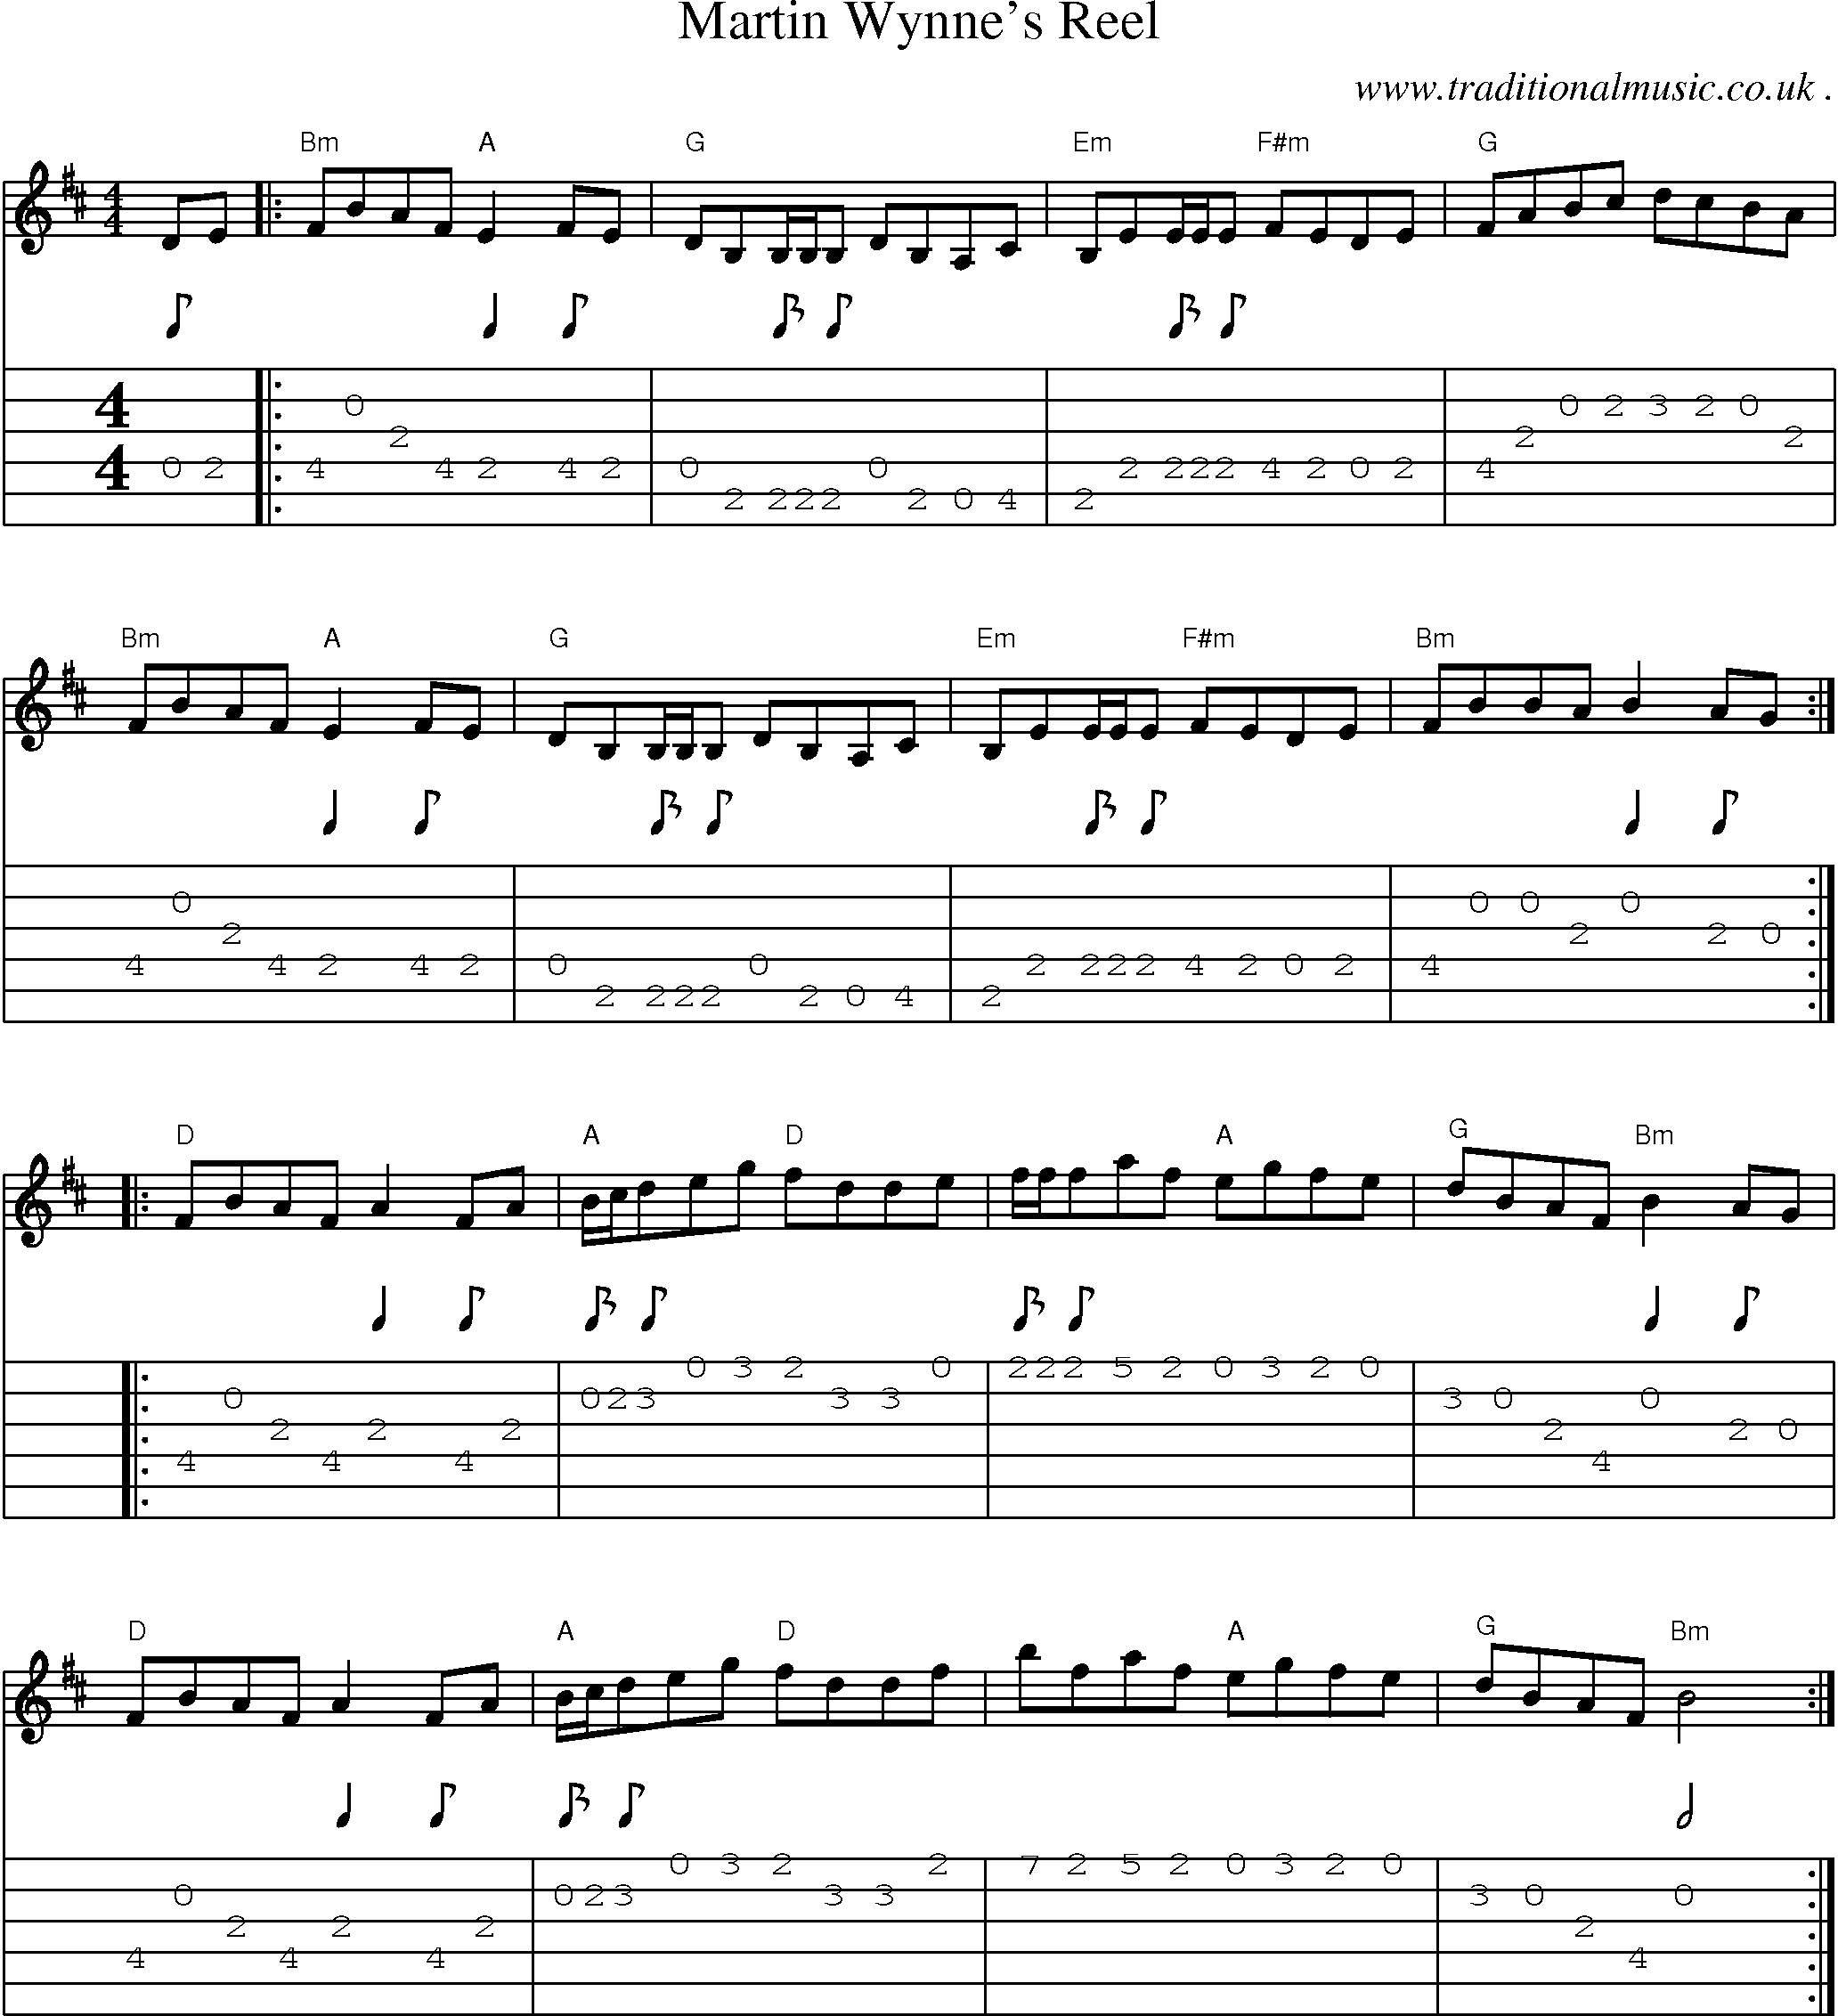 Music Score and Guitar Tabs for Martin Wynnes Reel